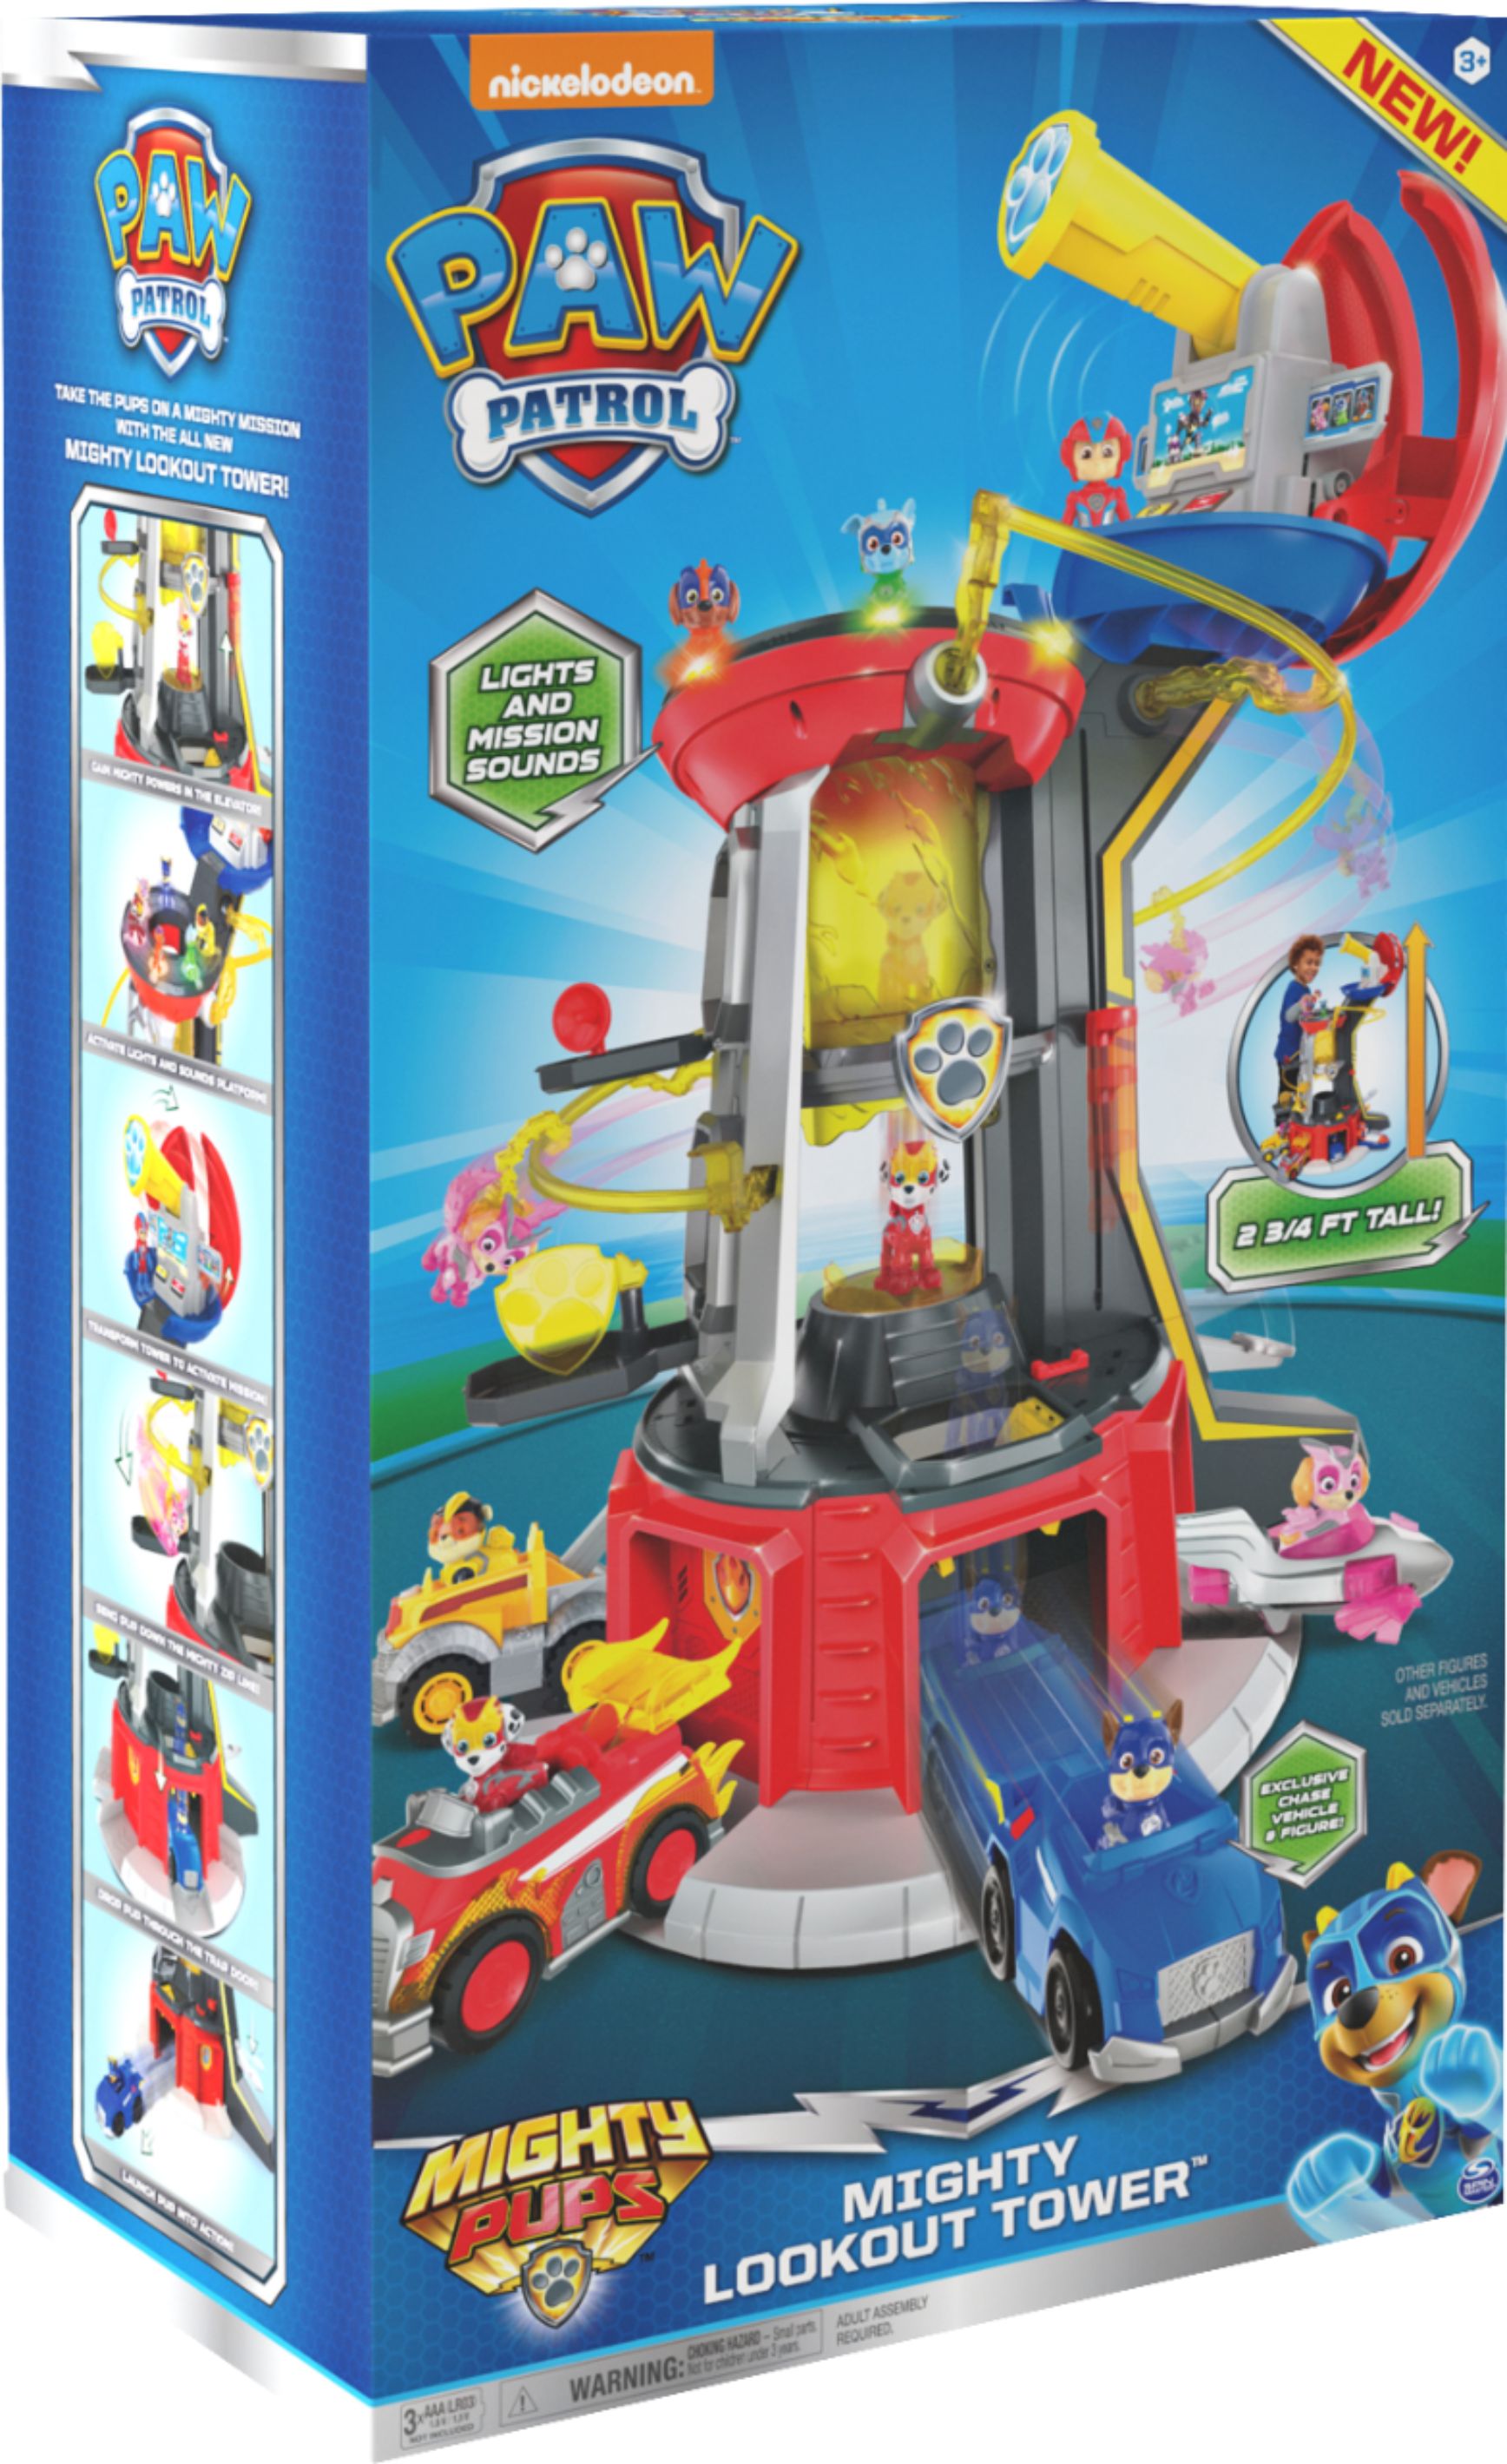 Paw Patrol Mighty Pups Lookout Tower Complete Set Town